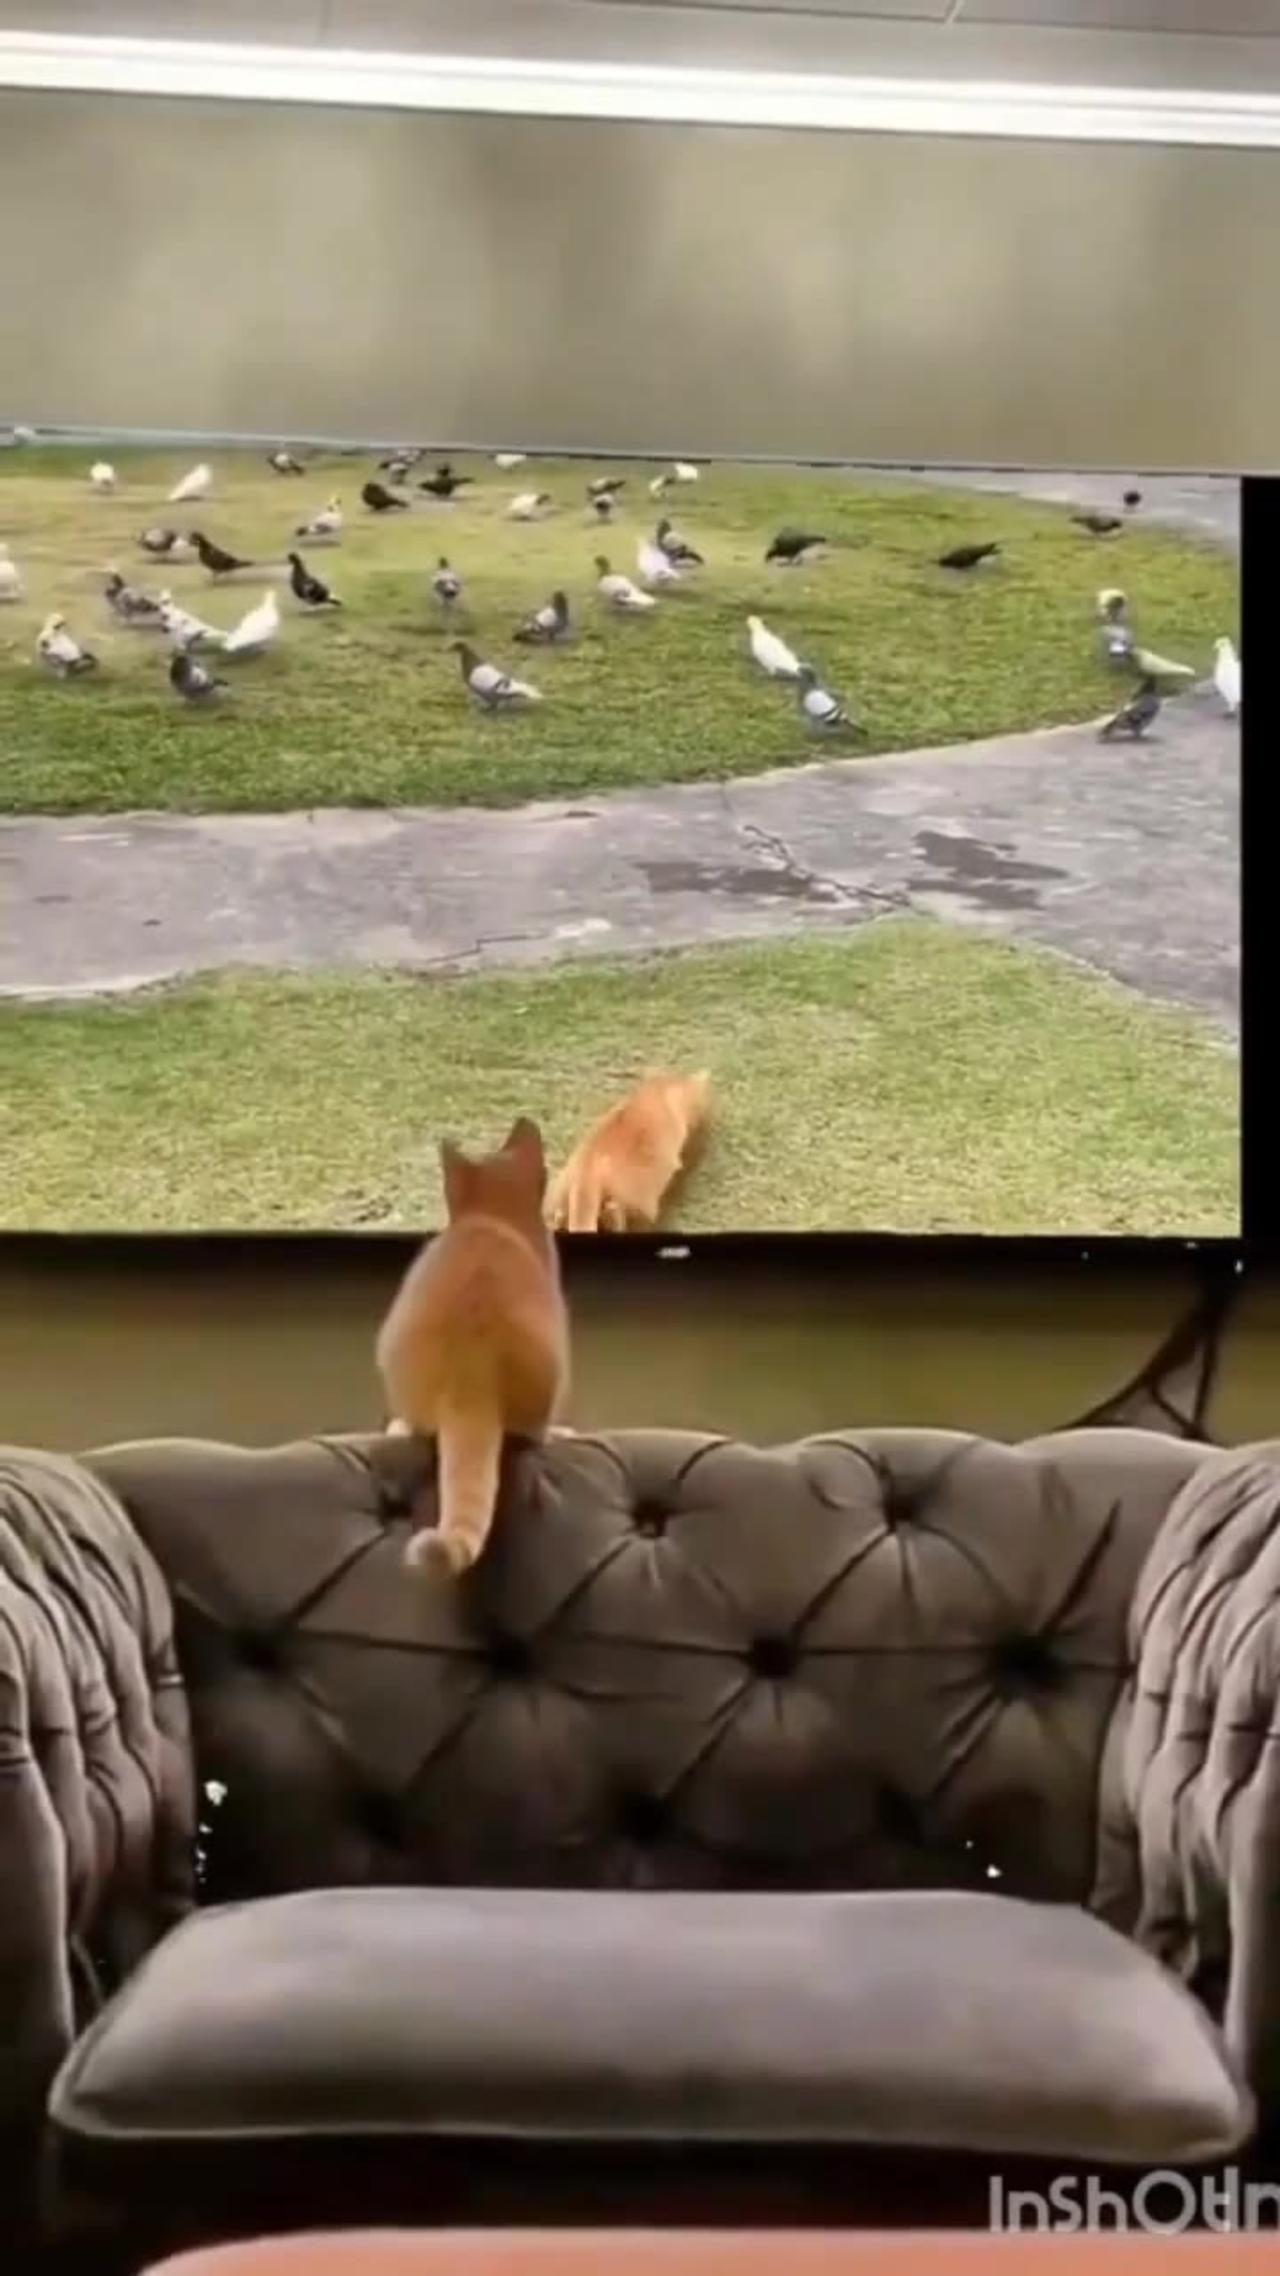 #Funny#funny😃cat#funny dog #funny video